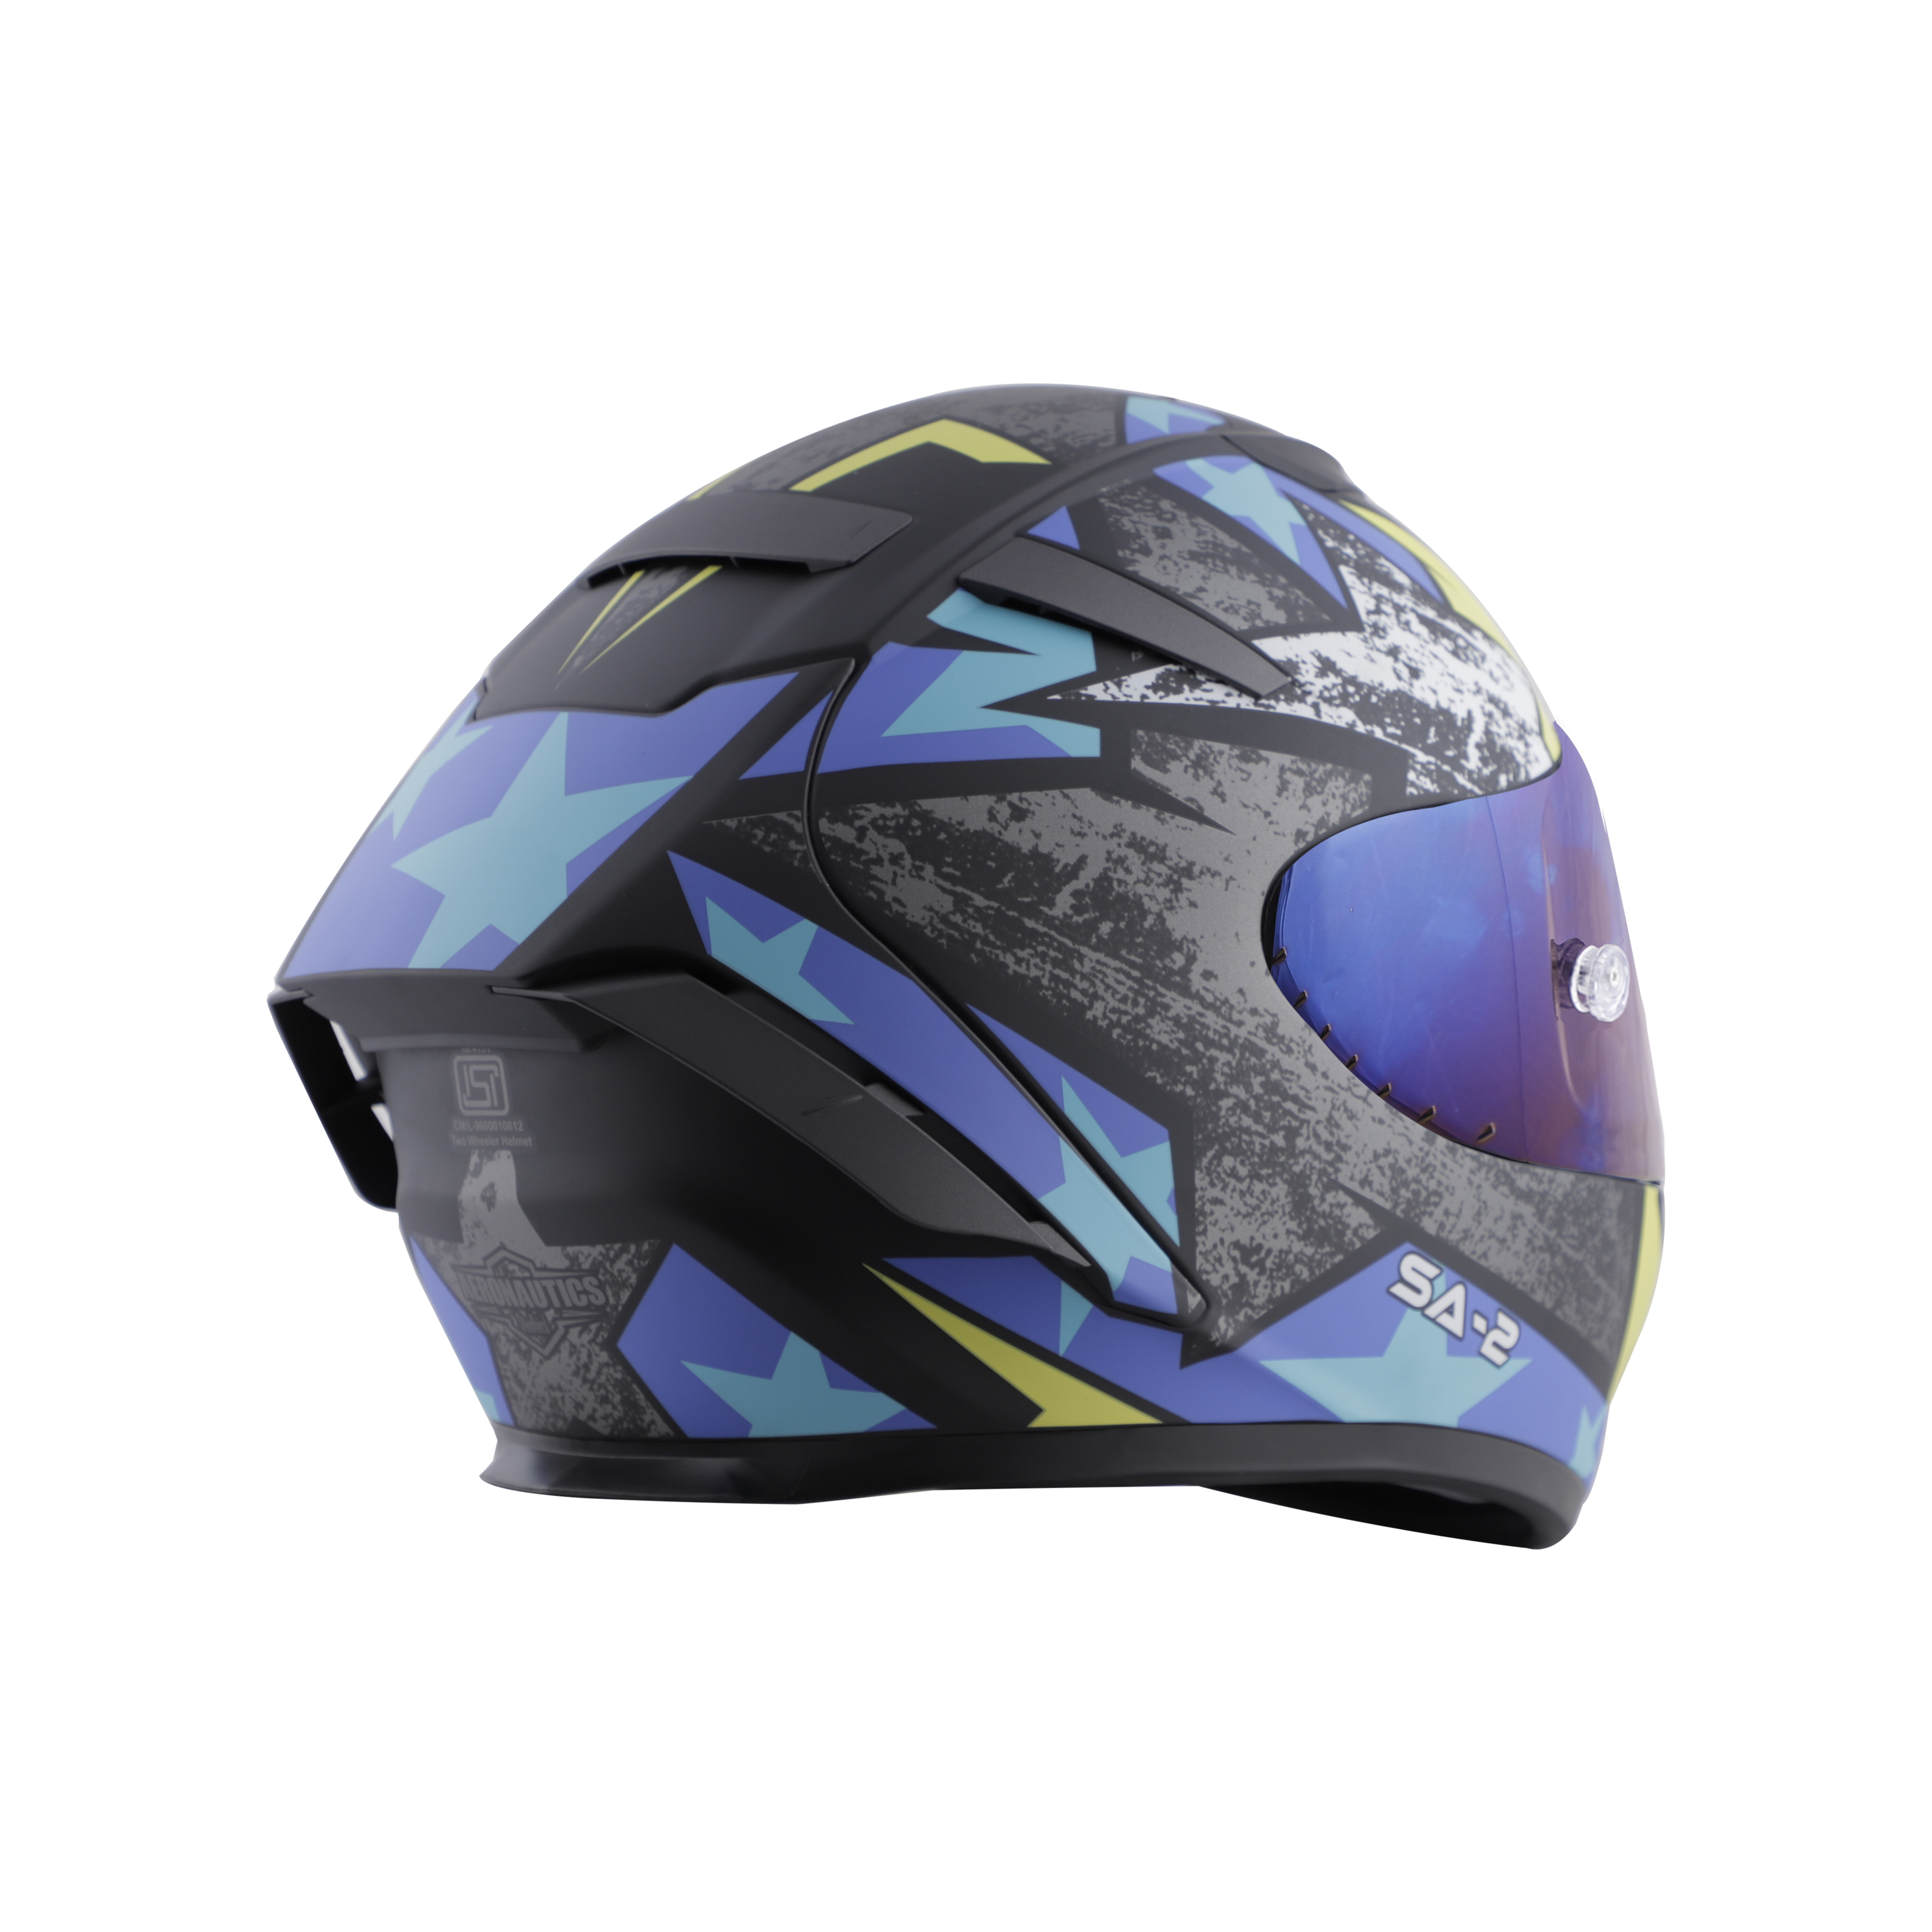 SA-2 STAR MAT BLACK WITH GREY  FITTTED WITH CLEAR VISOR EXTRA CHROME BLUE VISOR FREE (WITH ANTI-FOG SHIELD HOLDER)